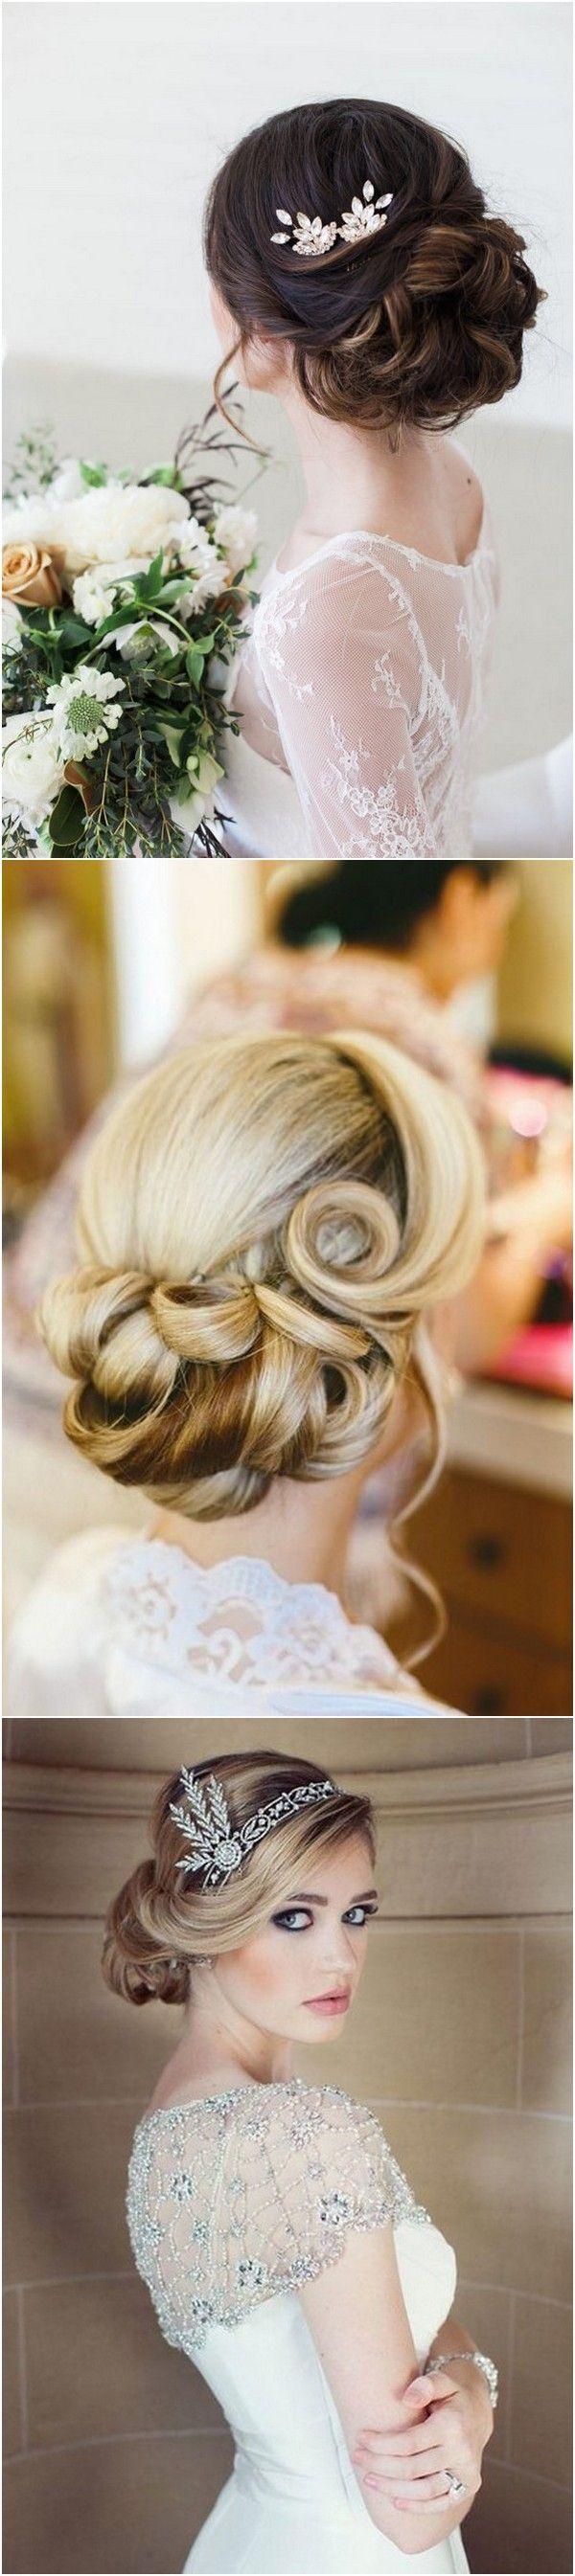 Mariage - Top 20 Vintage Wedding Hairstyles For Brides